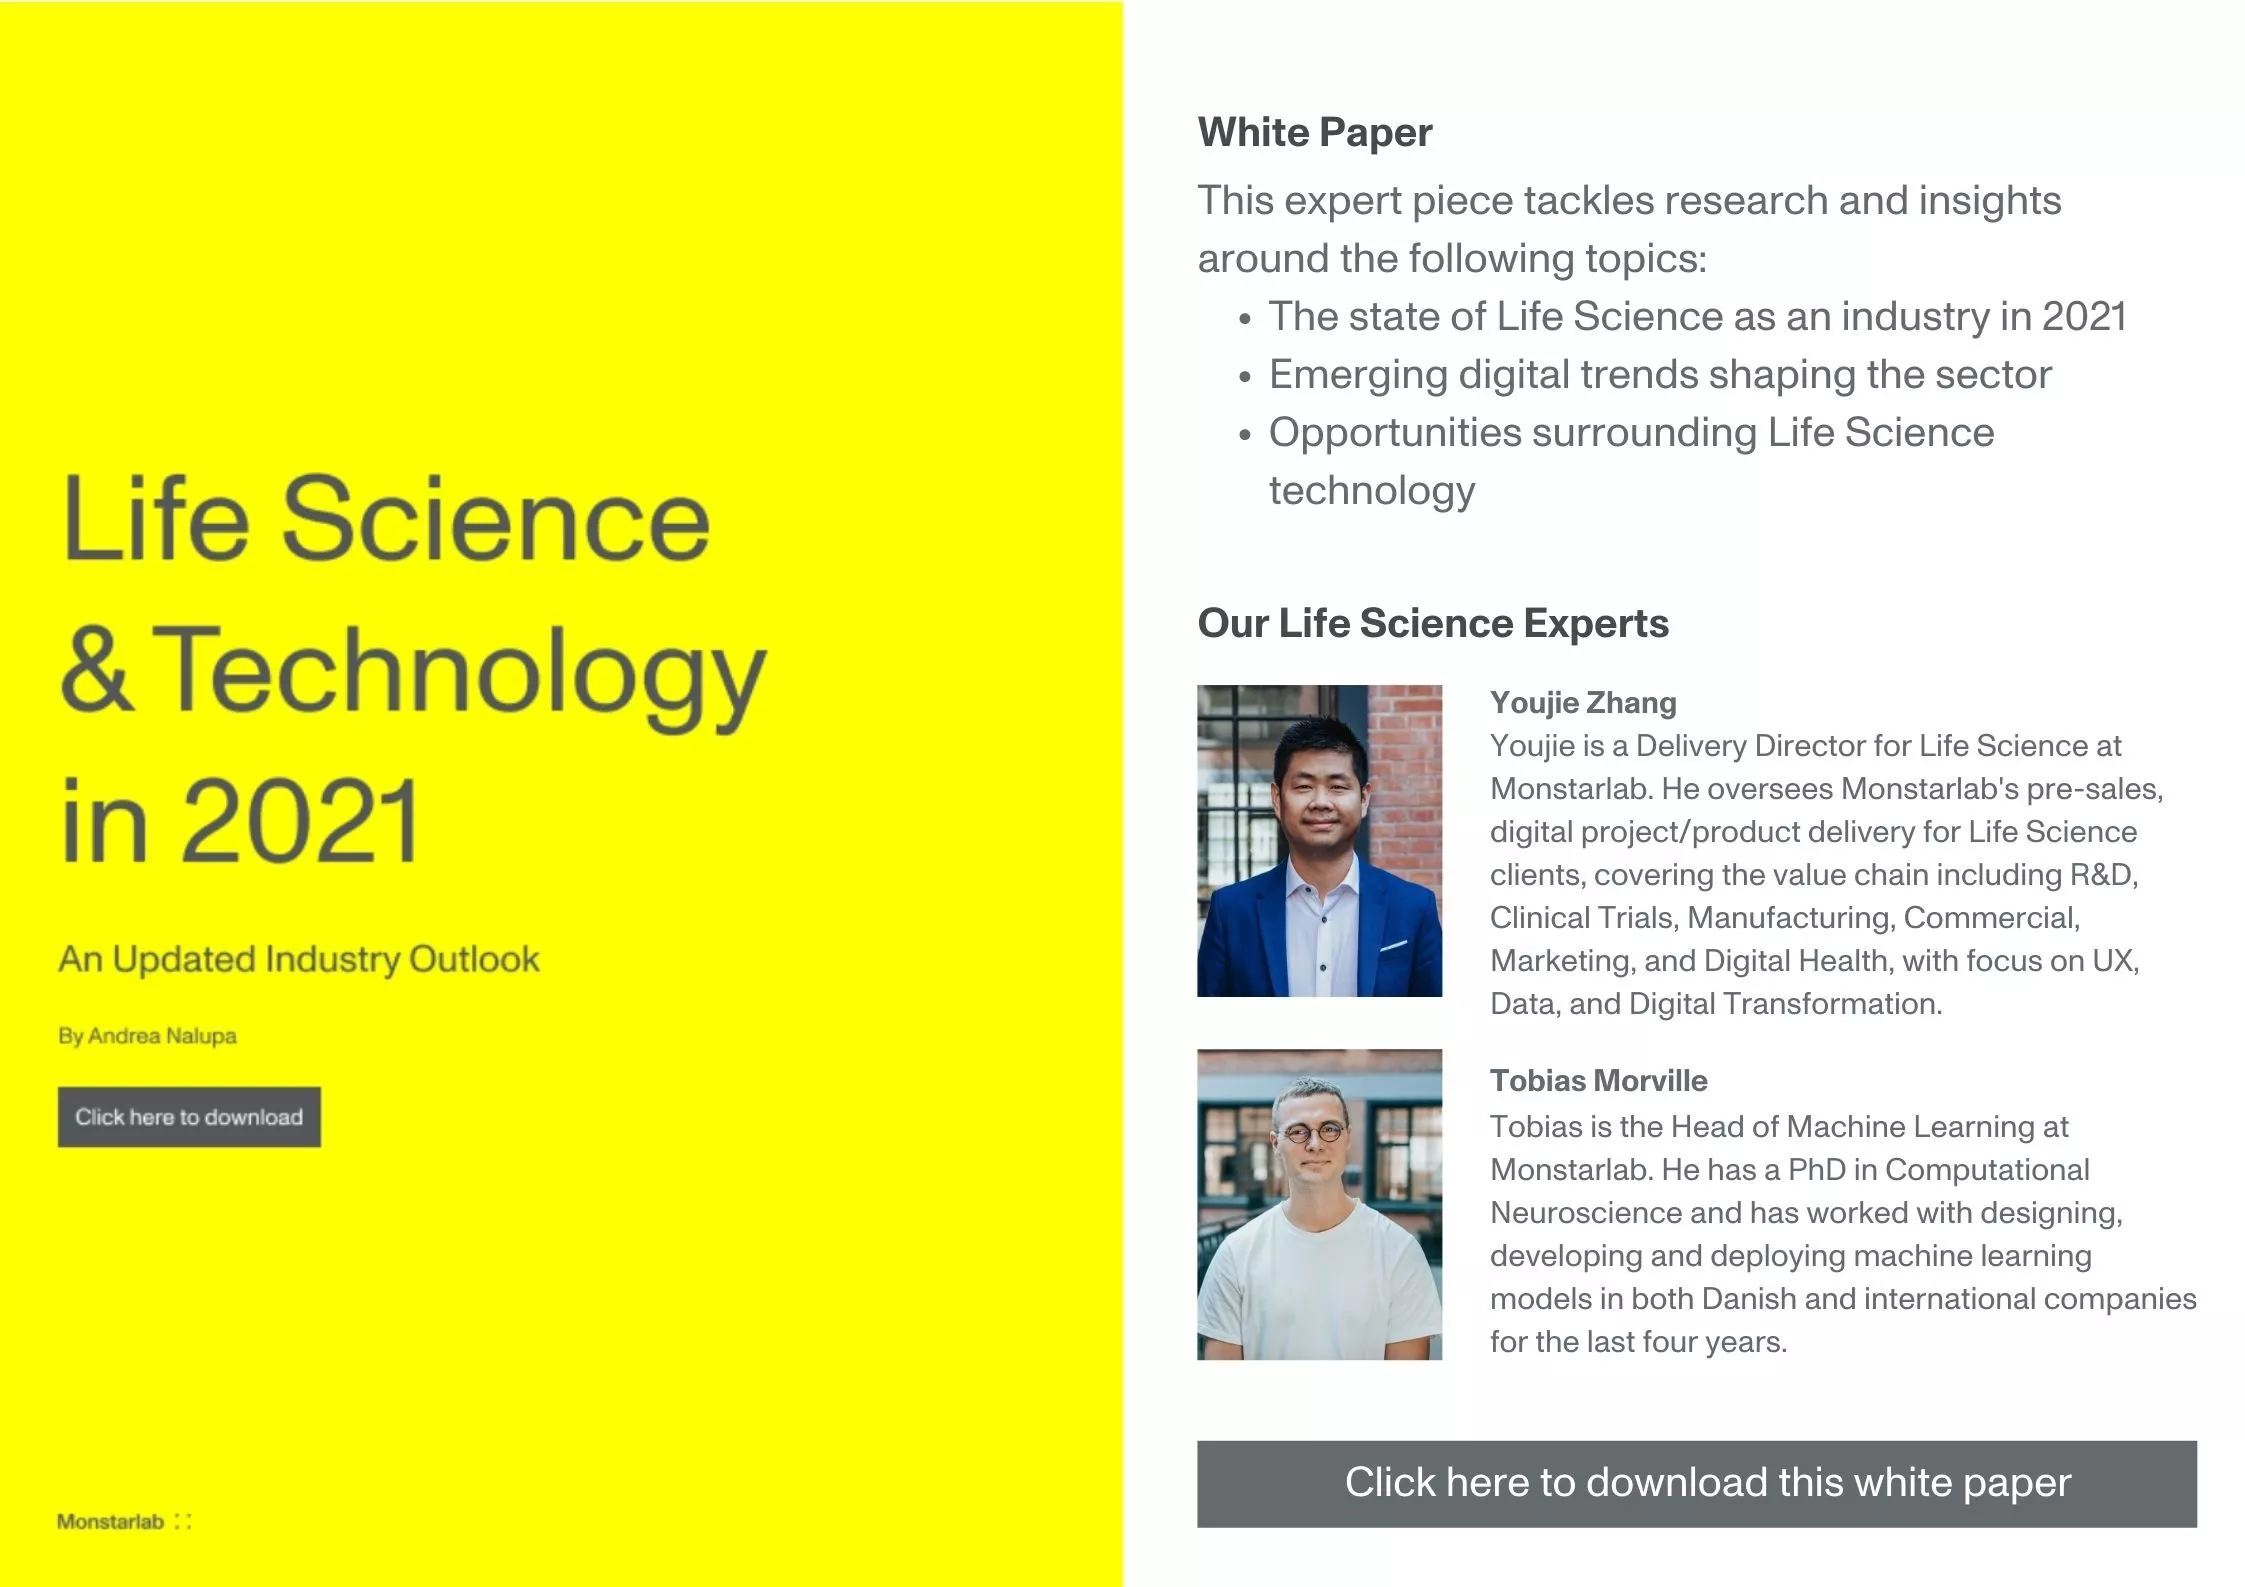 Life Science & Technology in 2021 White Paper